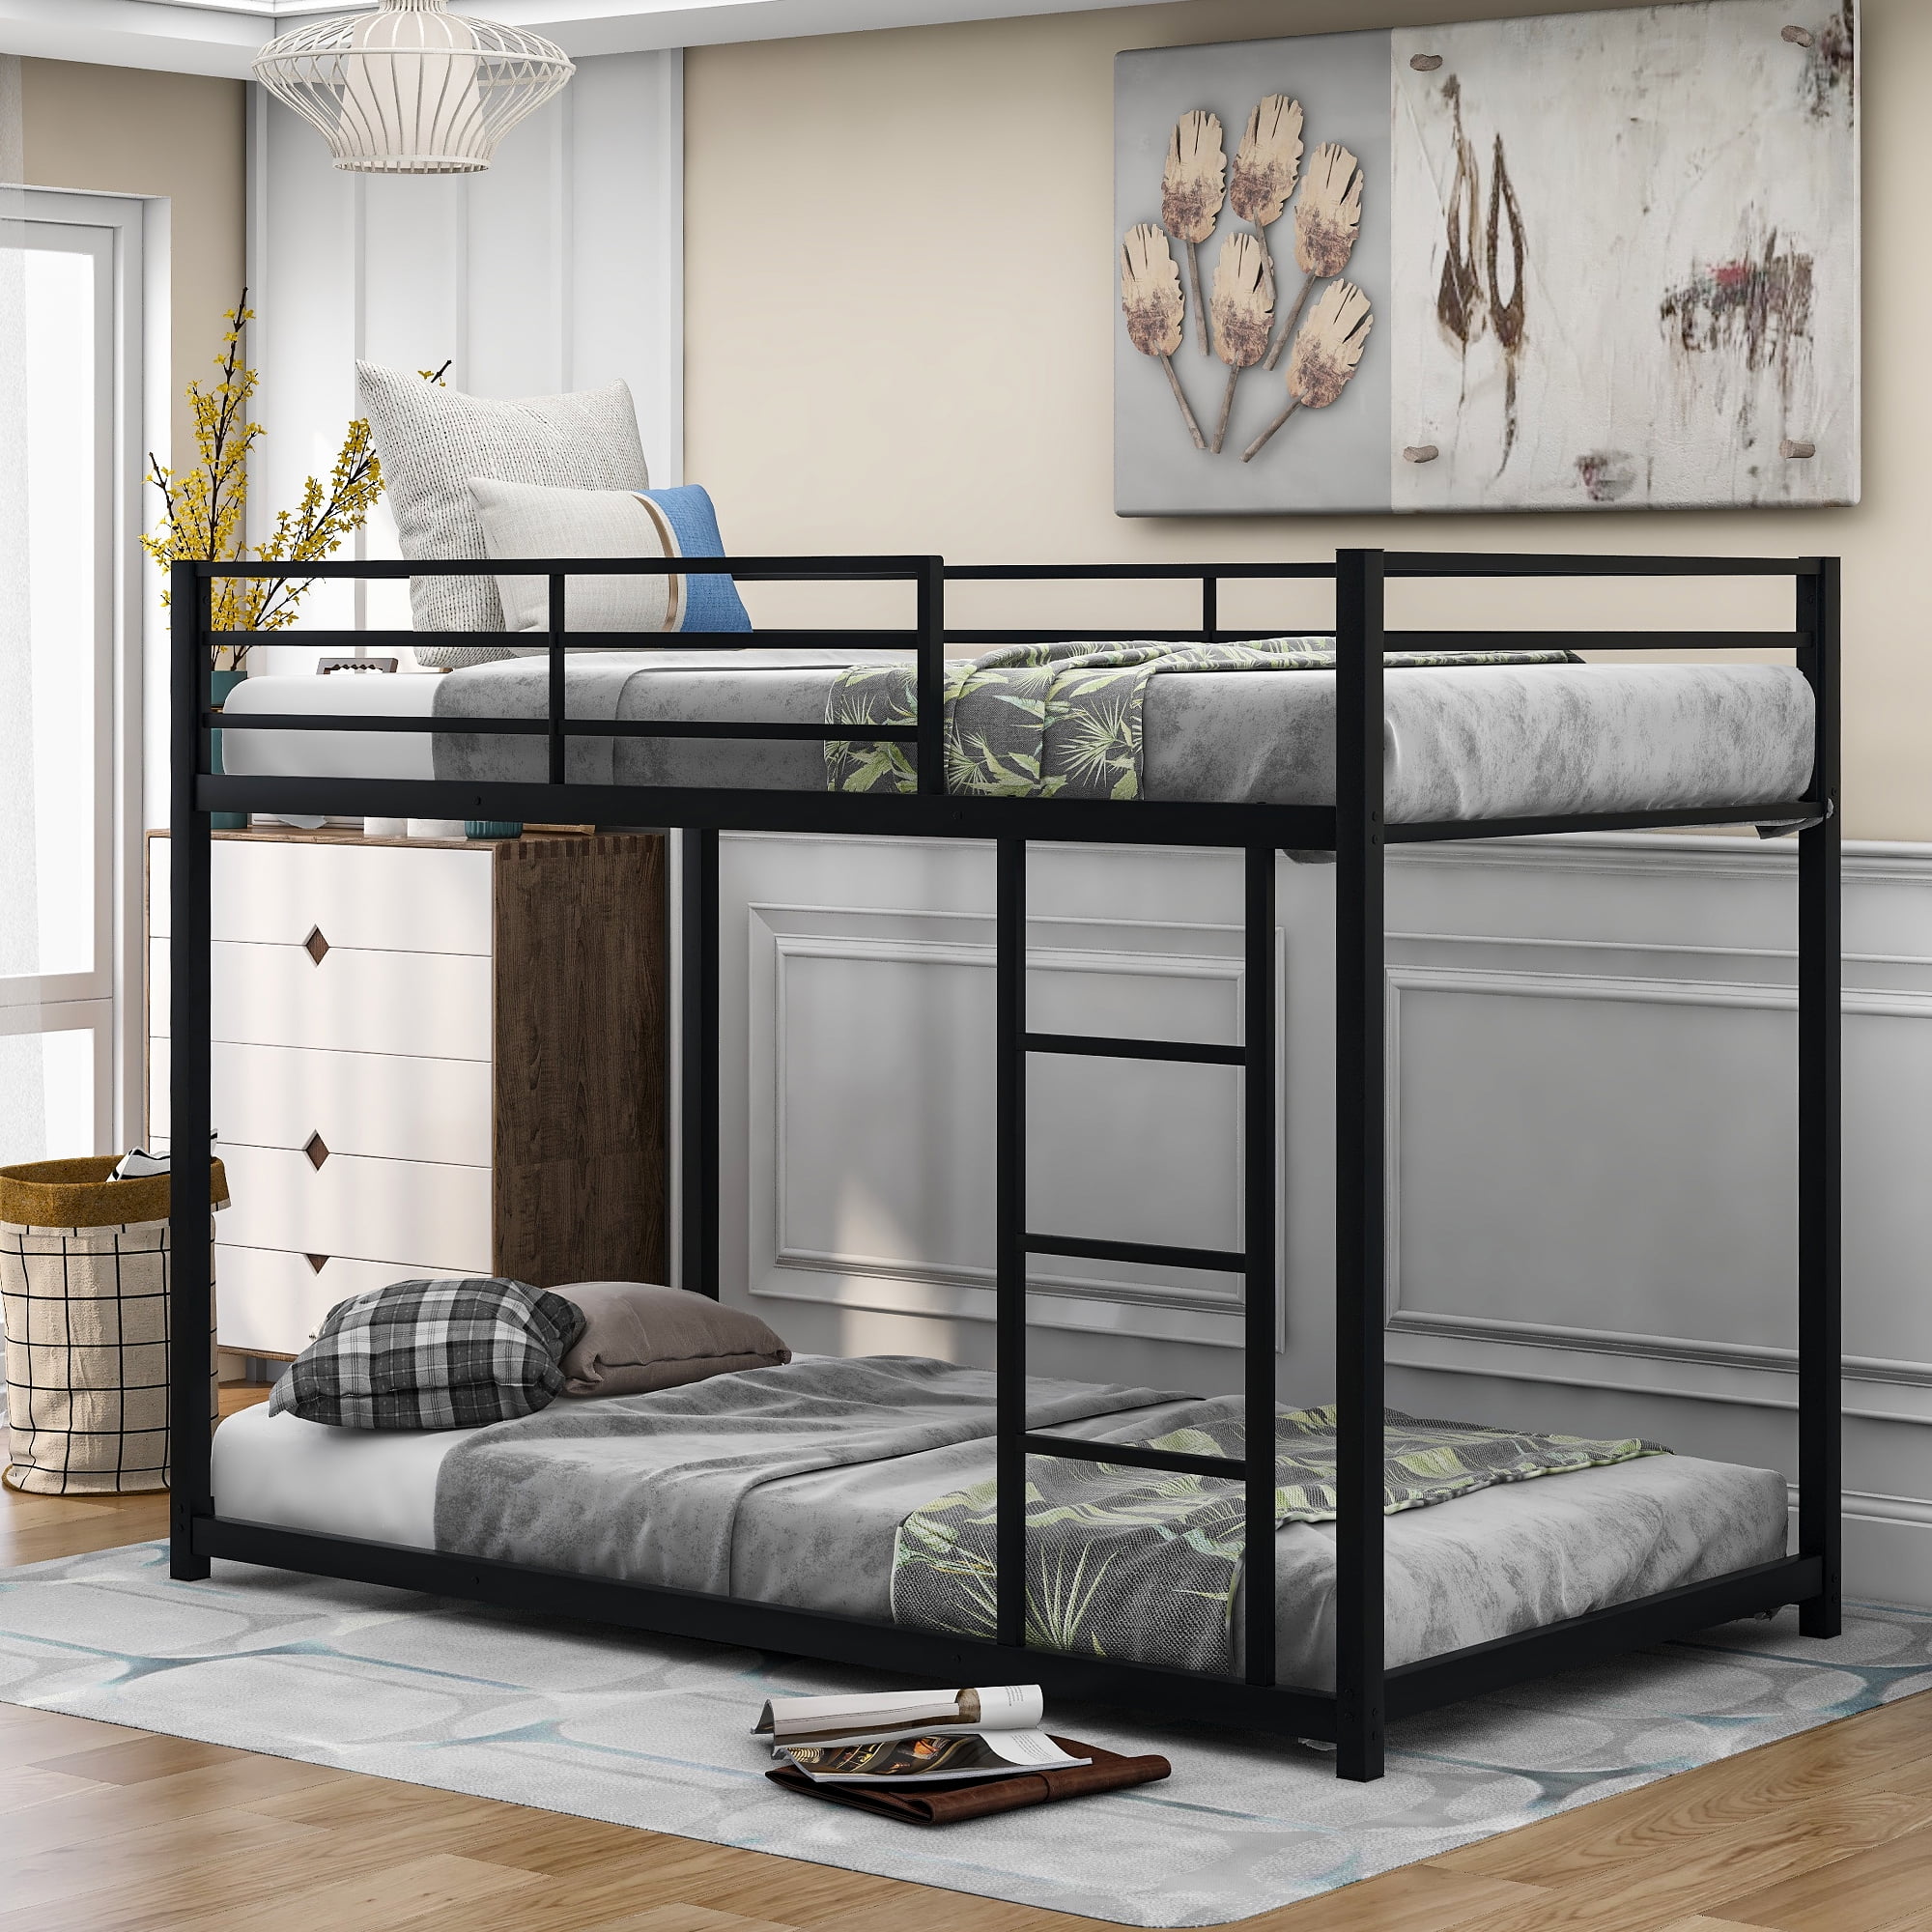 Euroco Twin Metal Low Bunk Bed With, Small Bunk Beds With Mattress